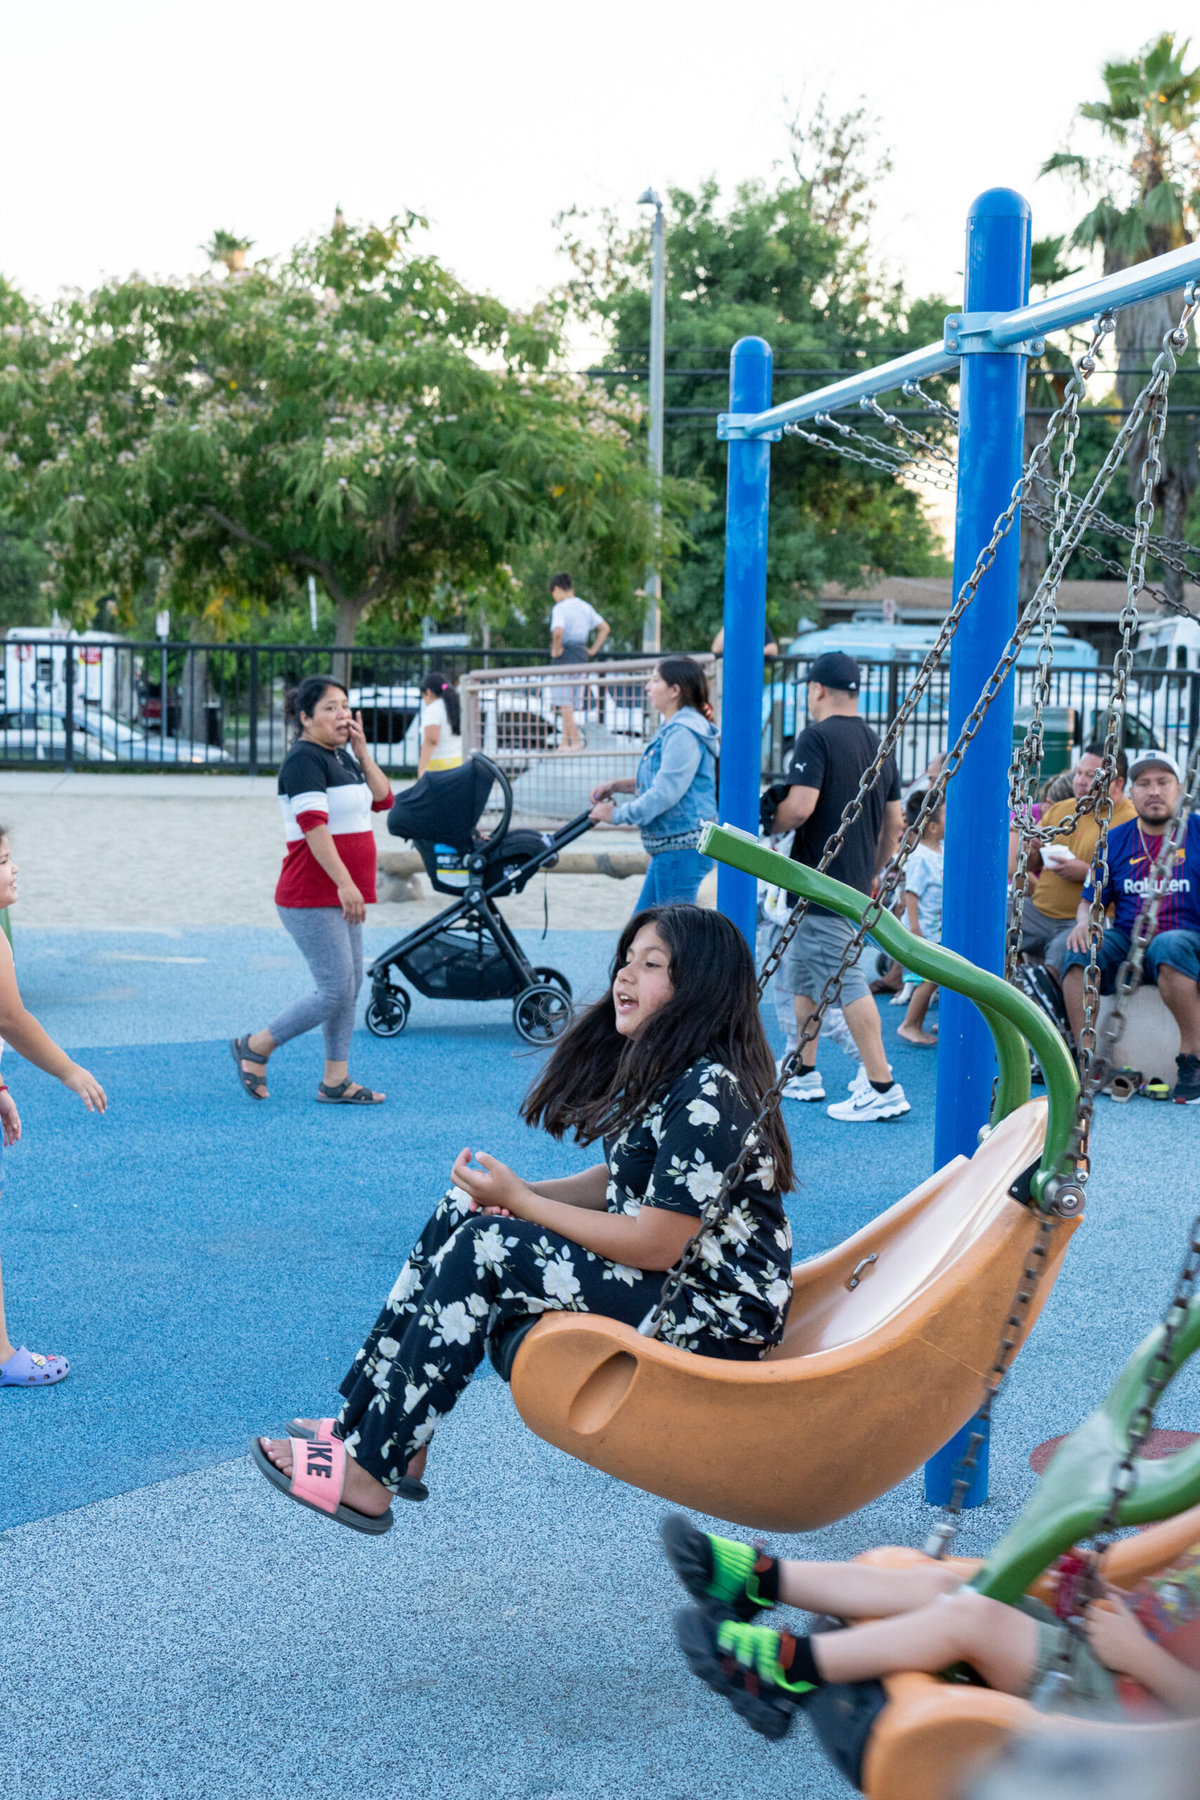 Residents play on a coated playground. A young girl is swinging on a swing in the foreground.